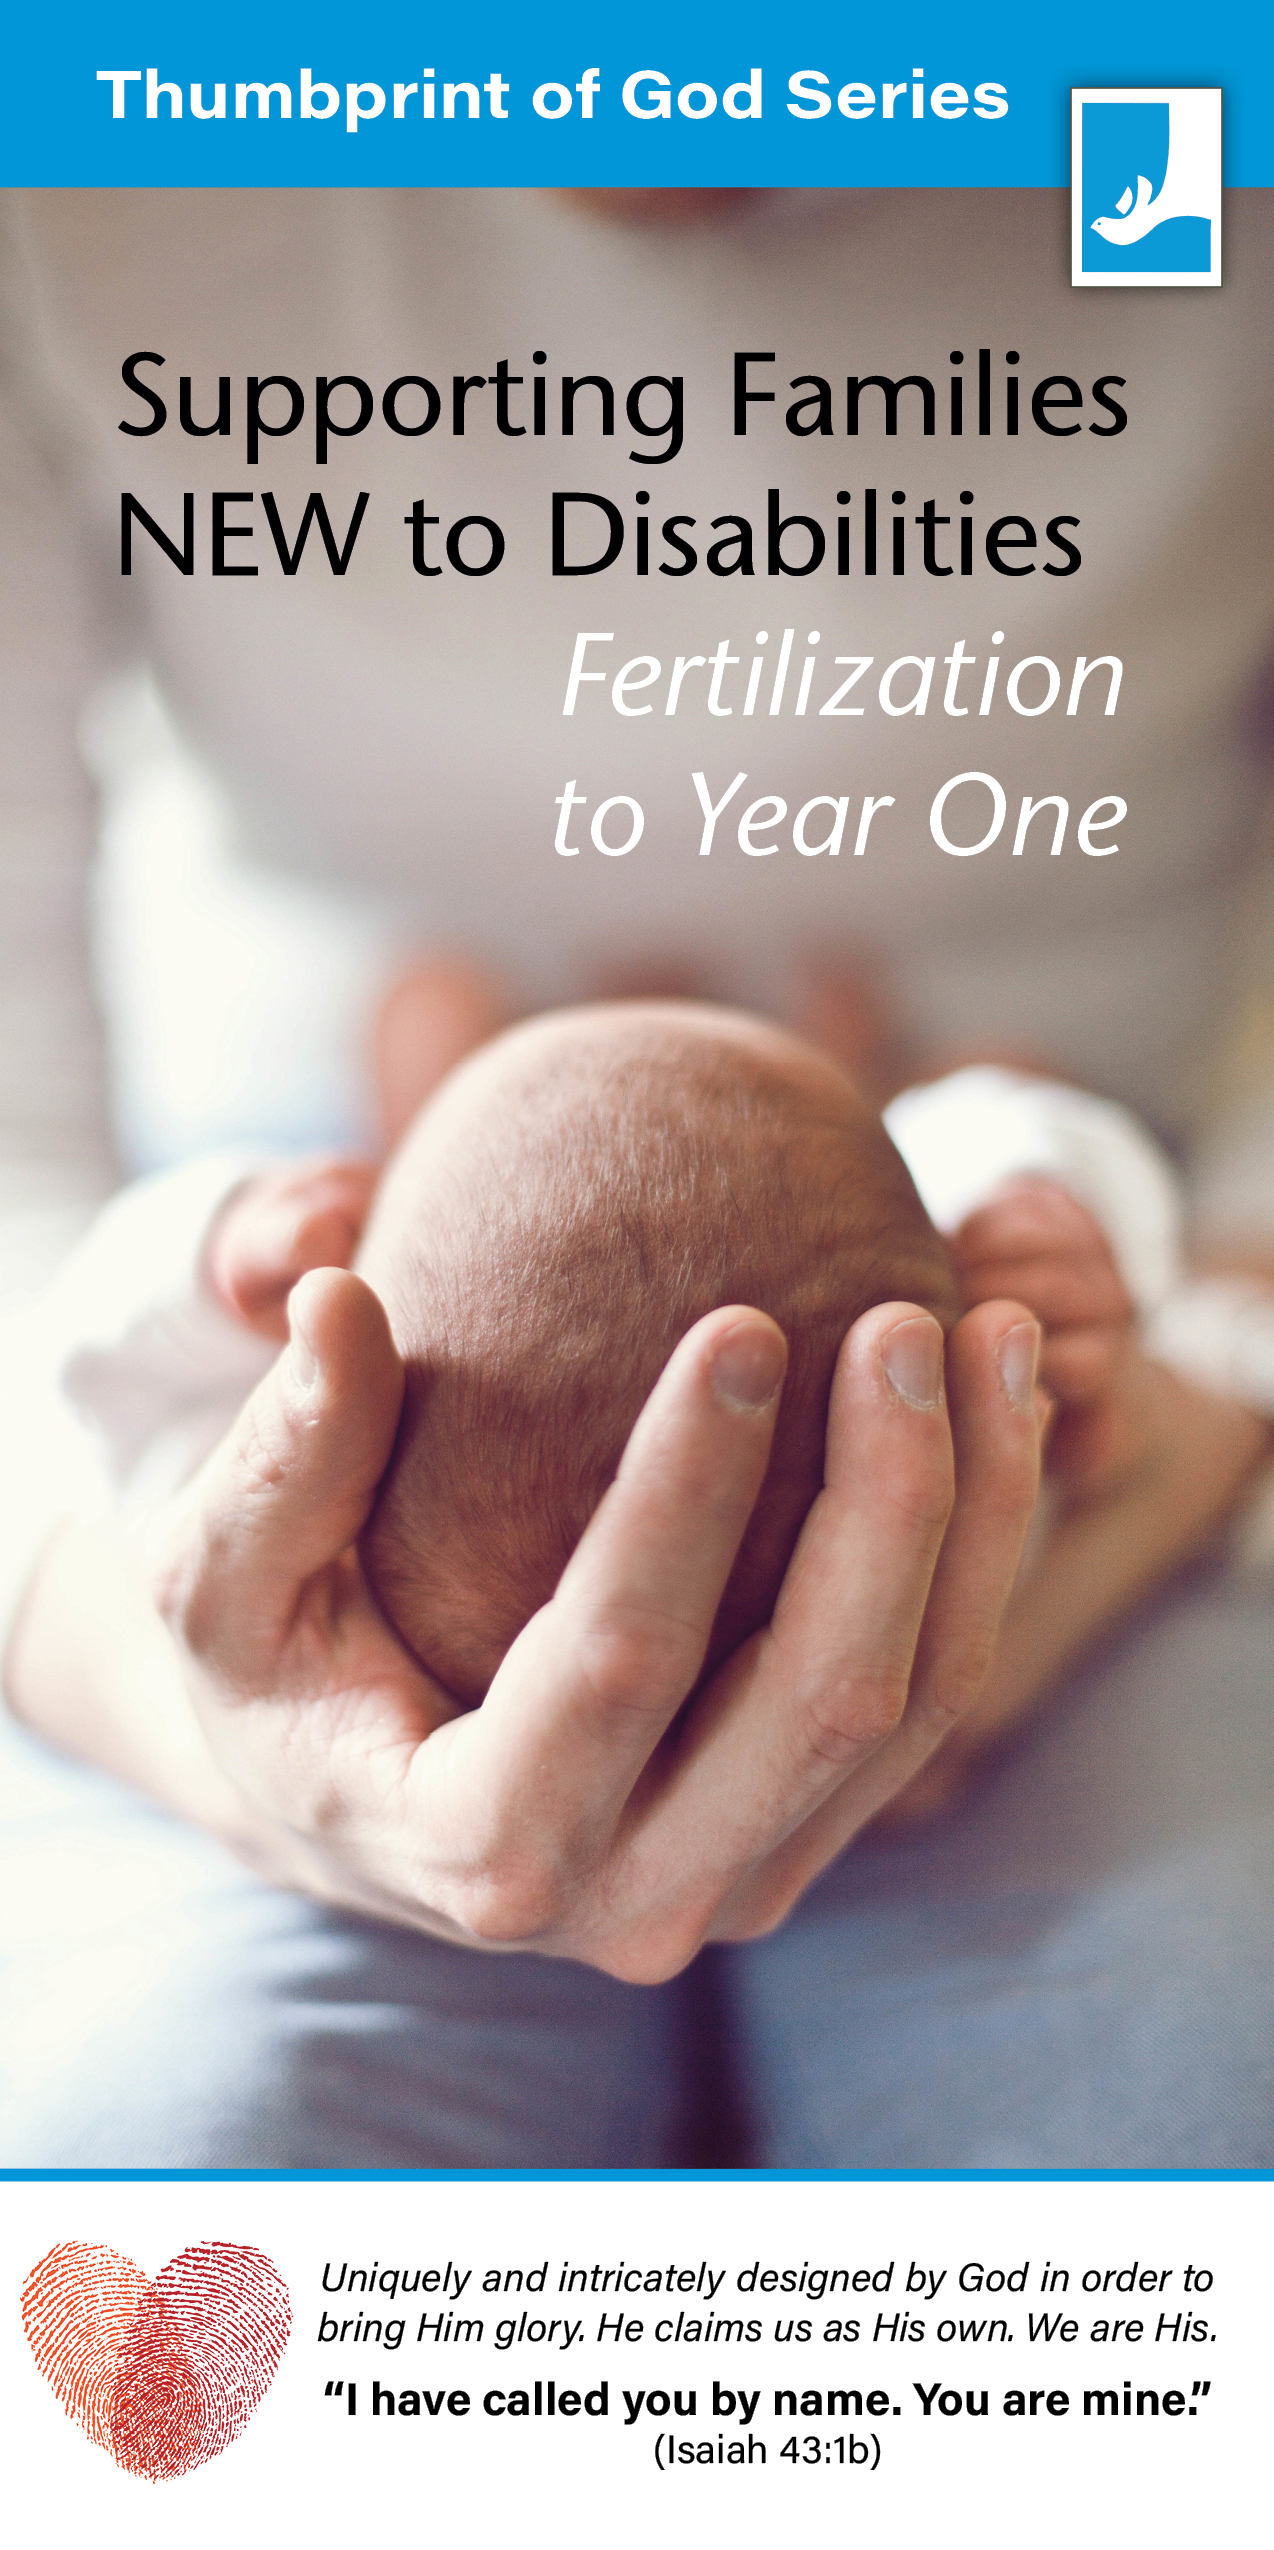 Supporting Families NEW to Disabilities - Fertilization to Year One